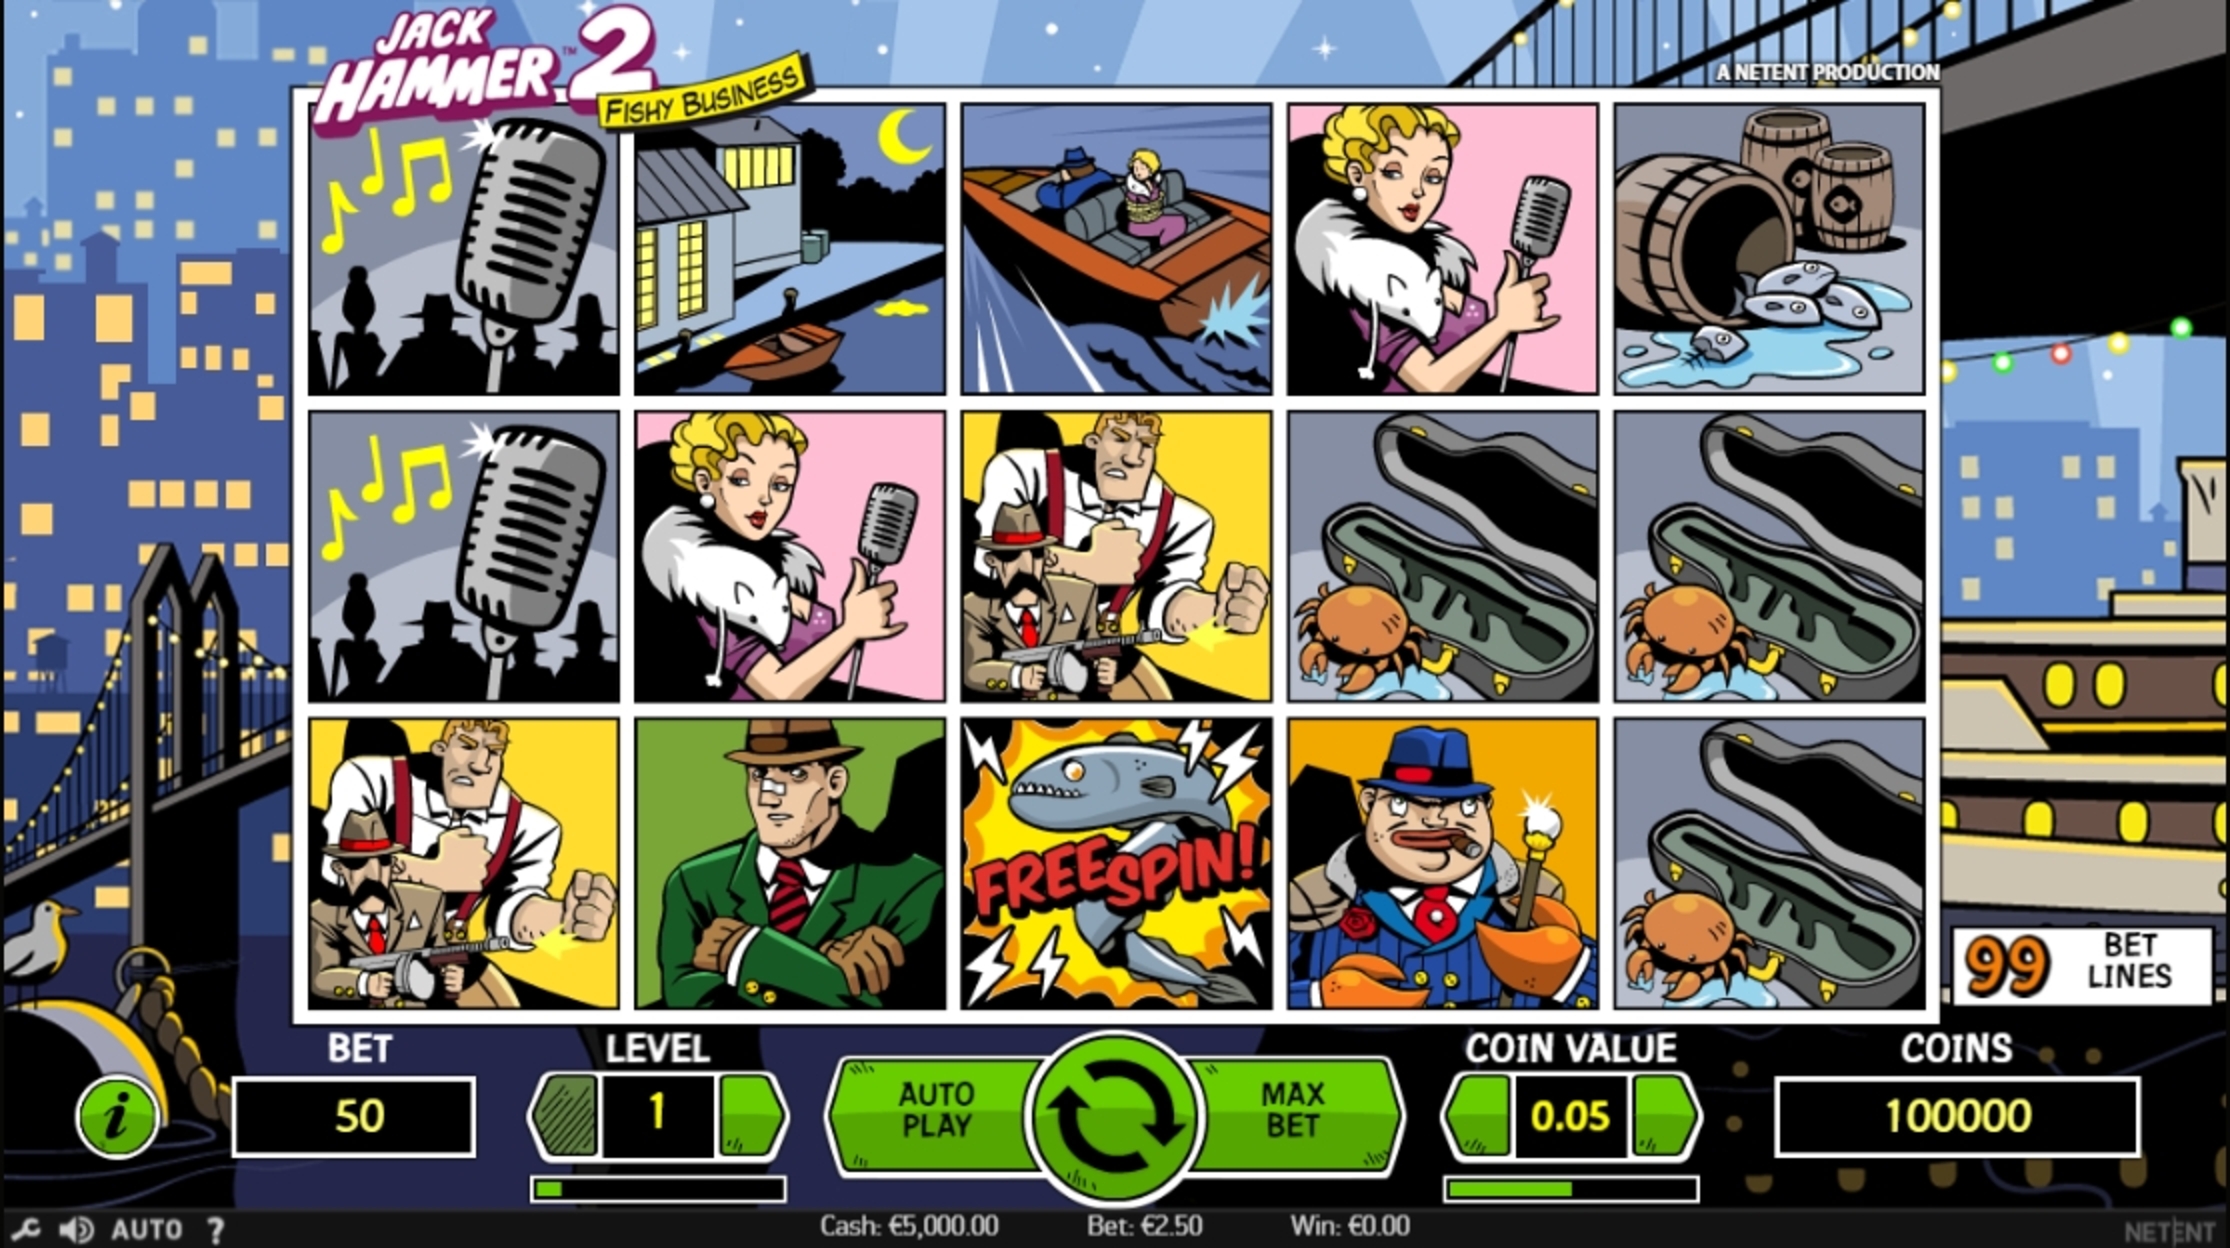 Reels in Jack Hammer 2 Slot Game by NetEnt